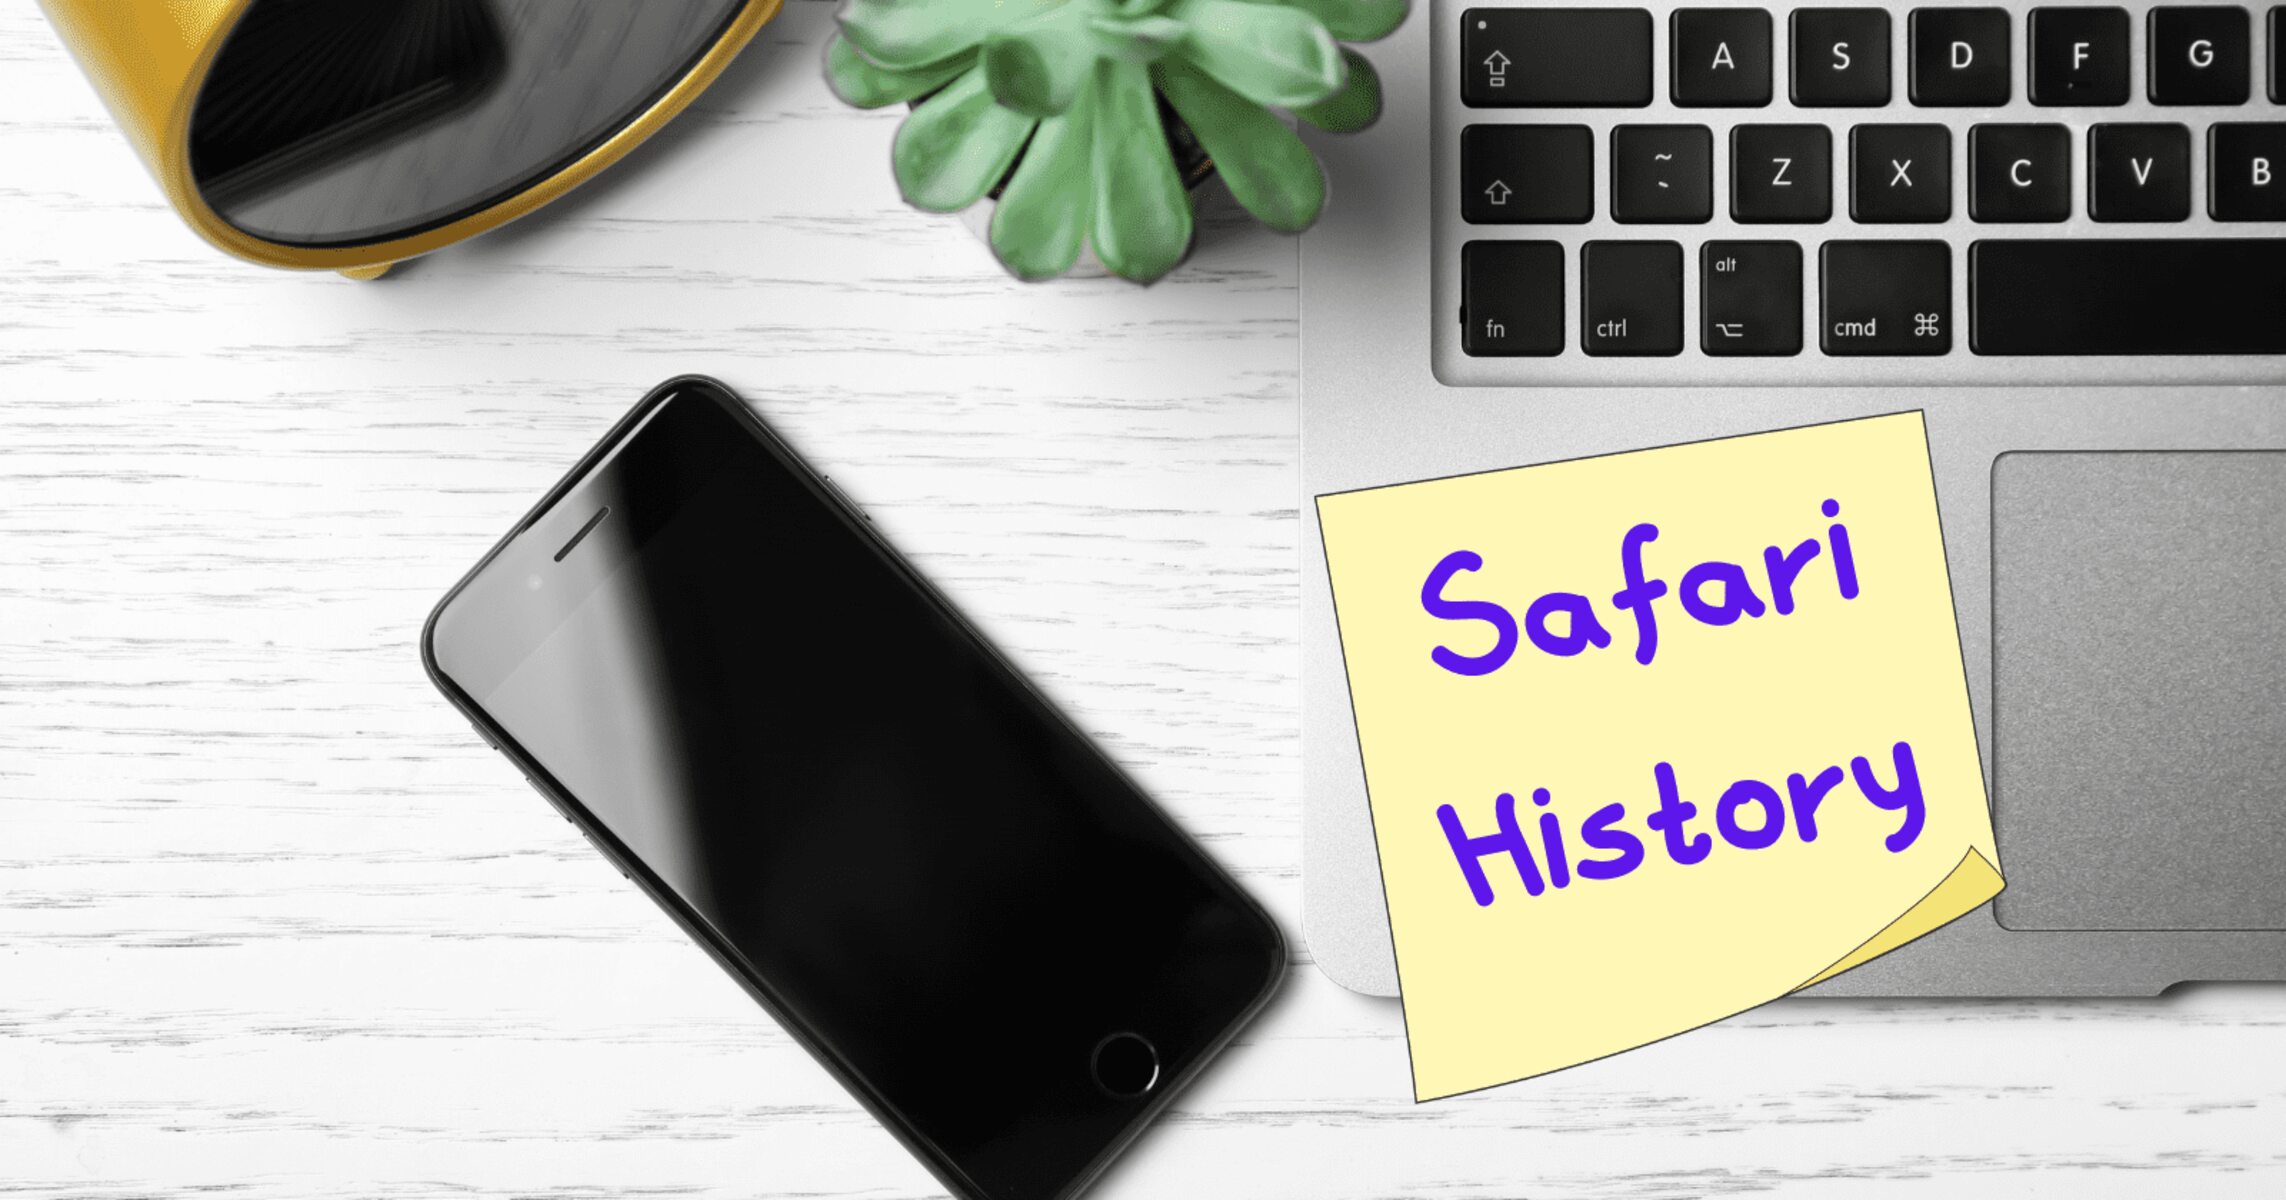 How To Look Up Safari History